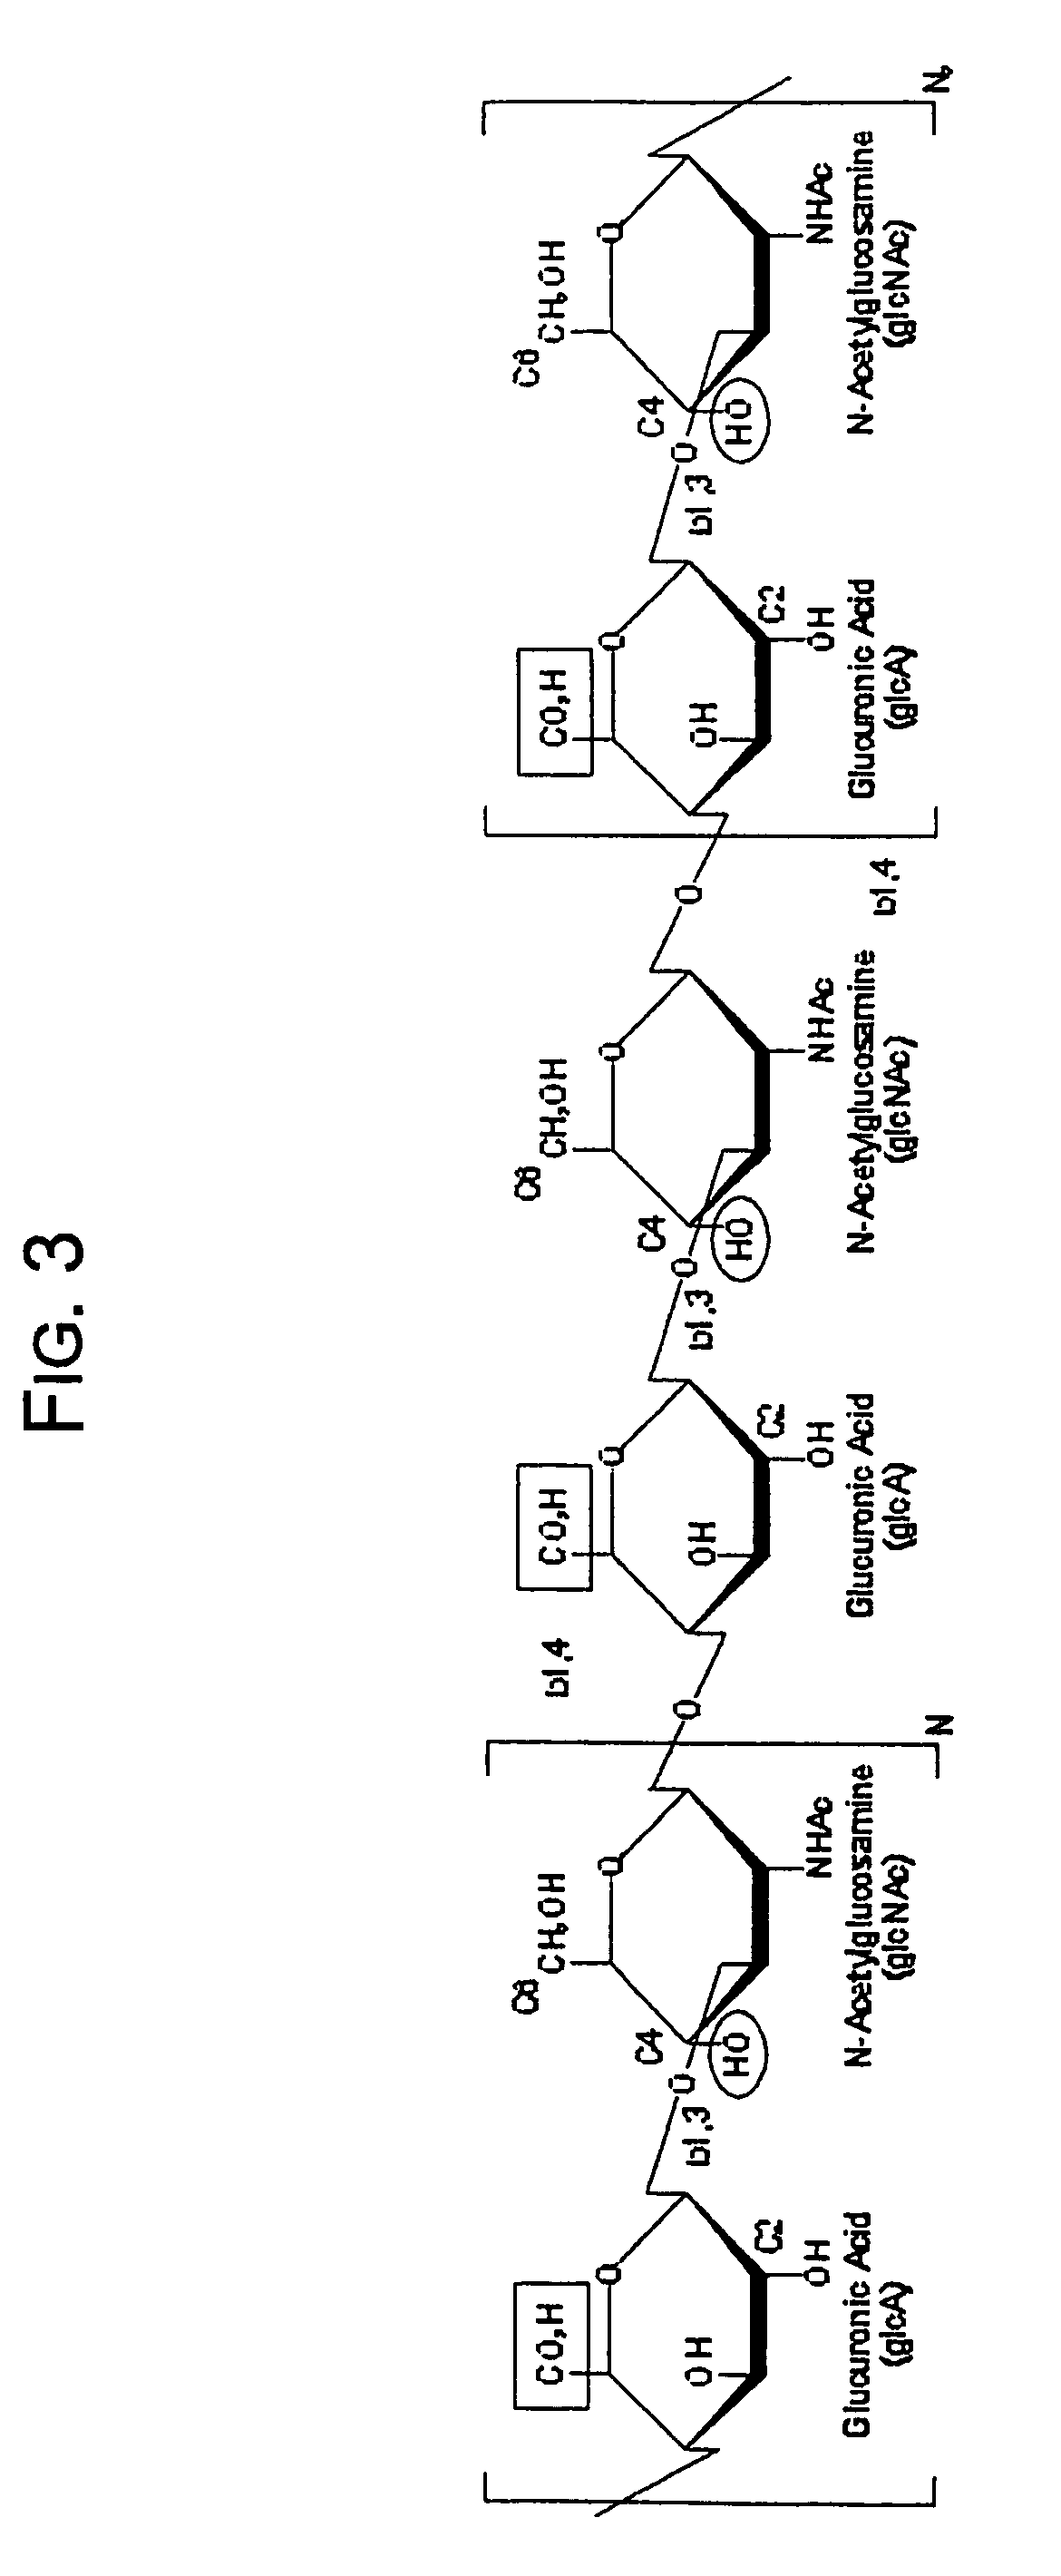 Hydroxyphenyl cross-linked macromolecular network and applications thereof